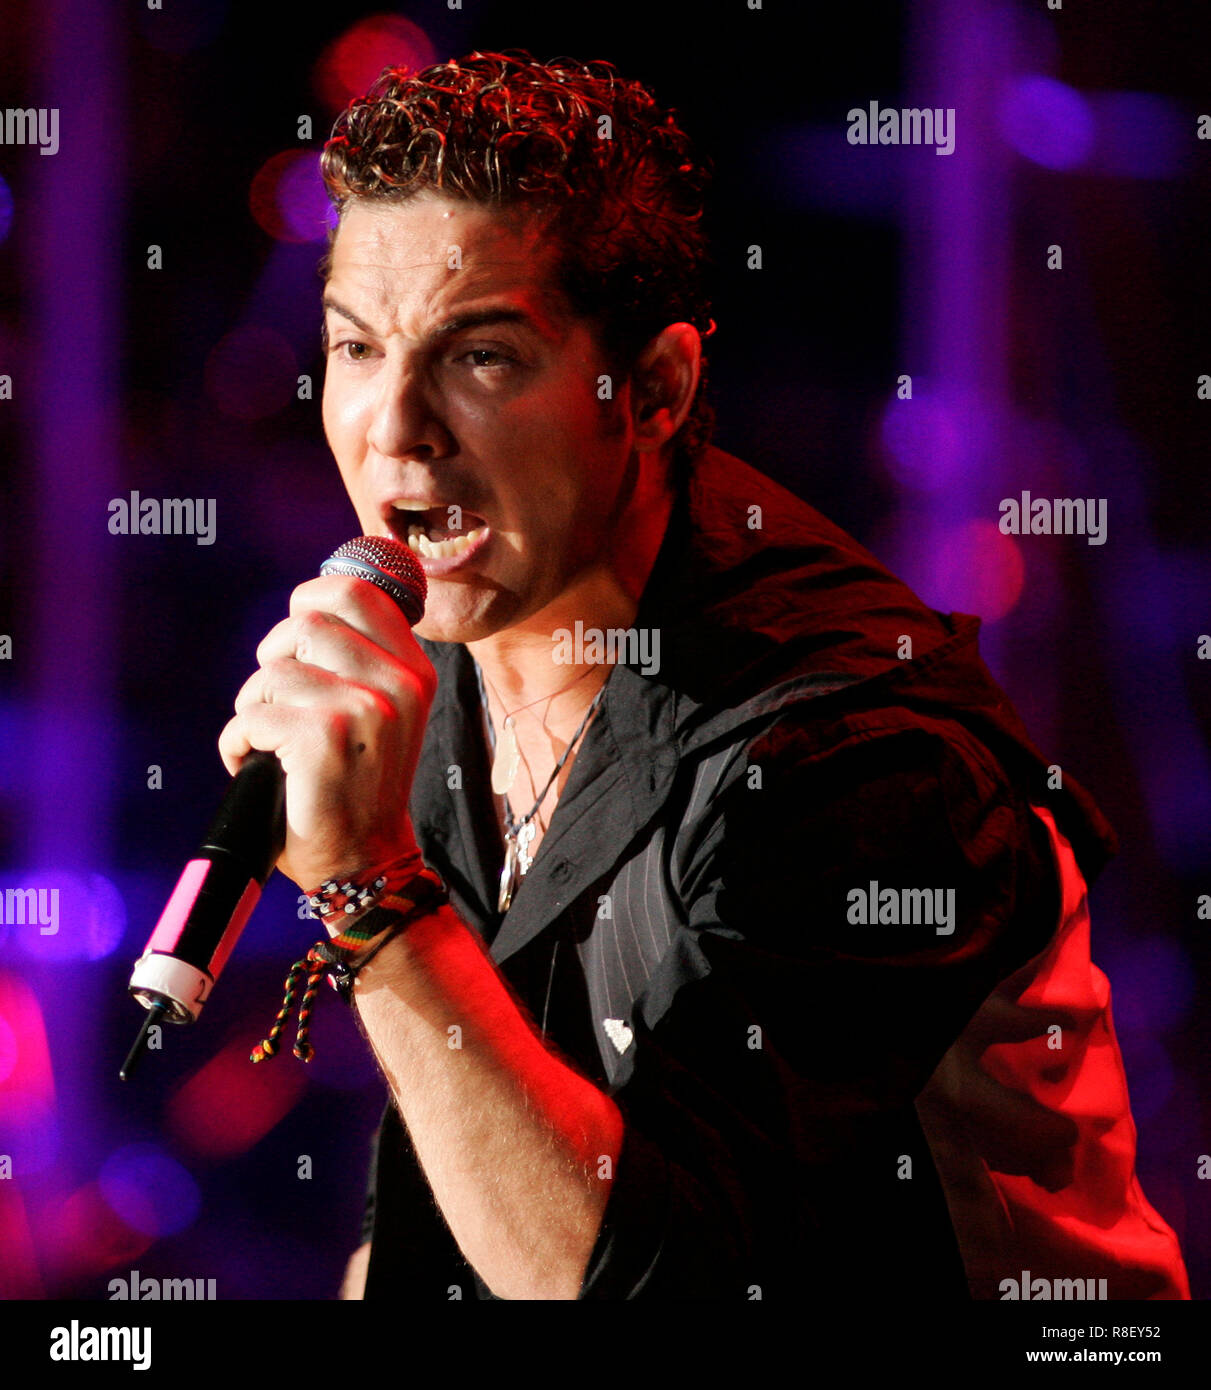 David Bisbal performs in concert during the Viva Romance show at the American Airlines Arena in Miami, on February  3, 2006. Stock Photo